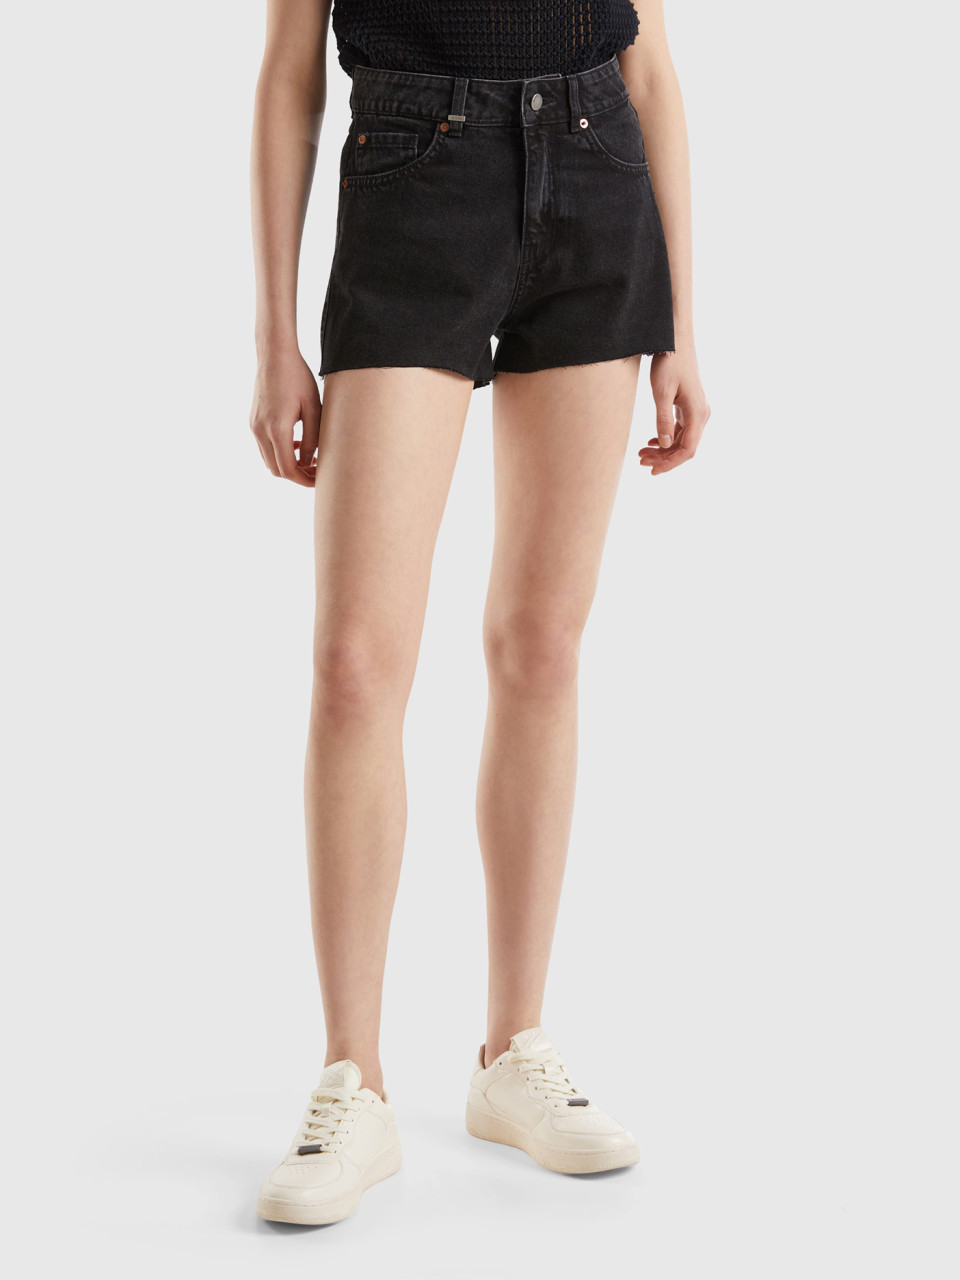 Benetton, Frayed Shorts In Recycled Cotton Blend, Black, Women